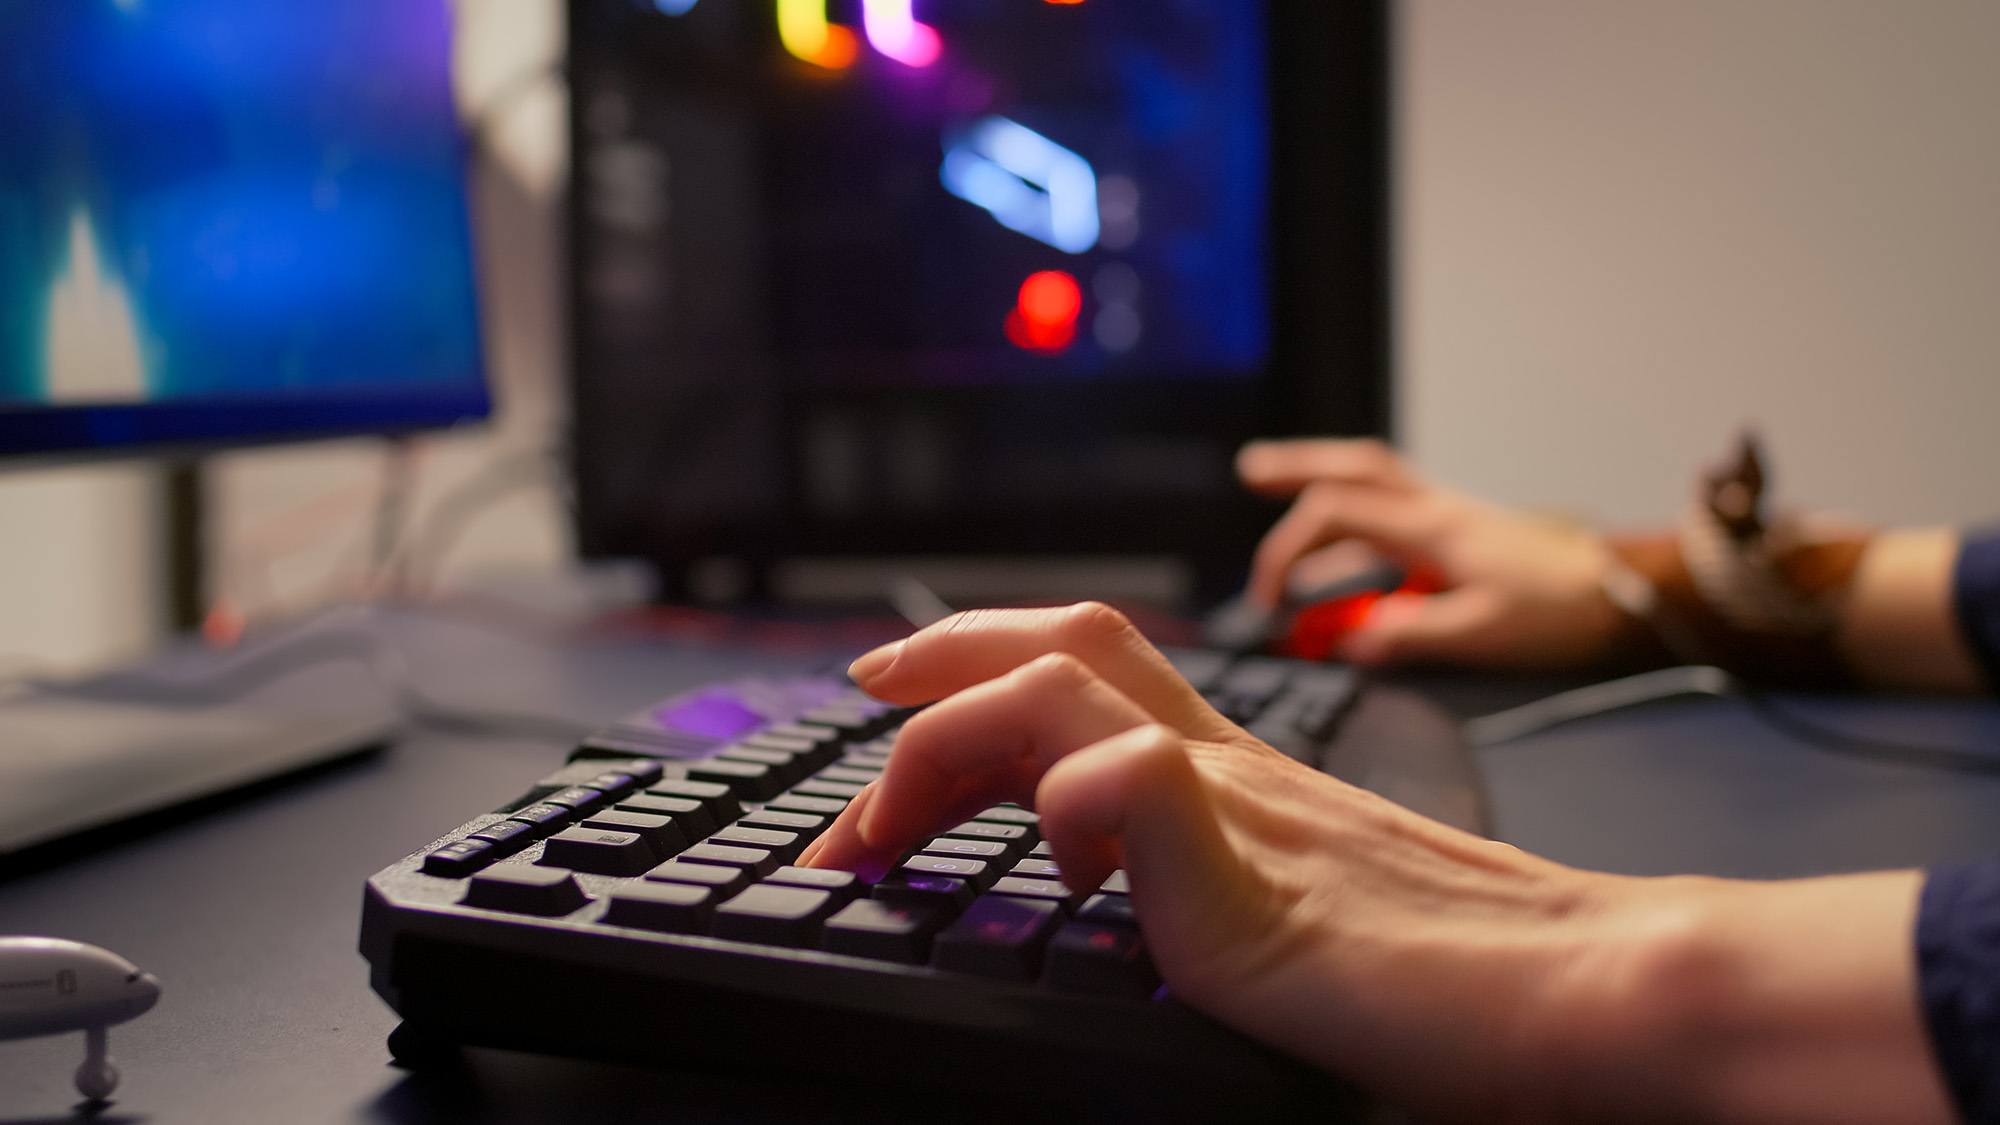 hands on keyboard with PC in the background